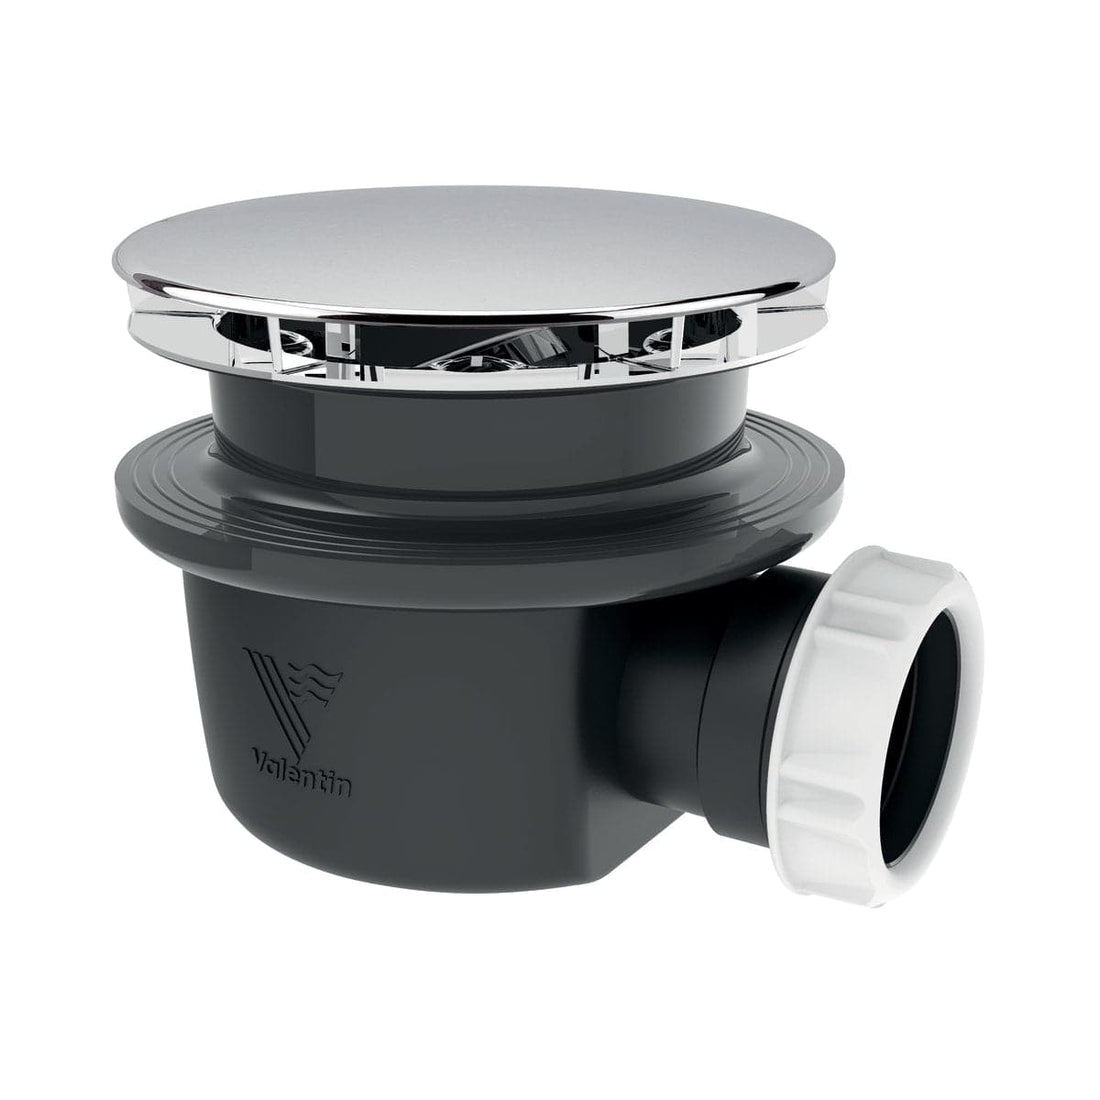 SHOWER TRAP DIA 90 MM EXTRA FLAT H 60 MM CLAMPING UP TO 25 MM PLASTIC WITH DRAIN - best price from Maltashopper.com BR430001309